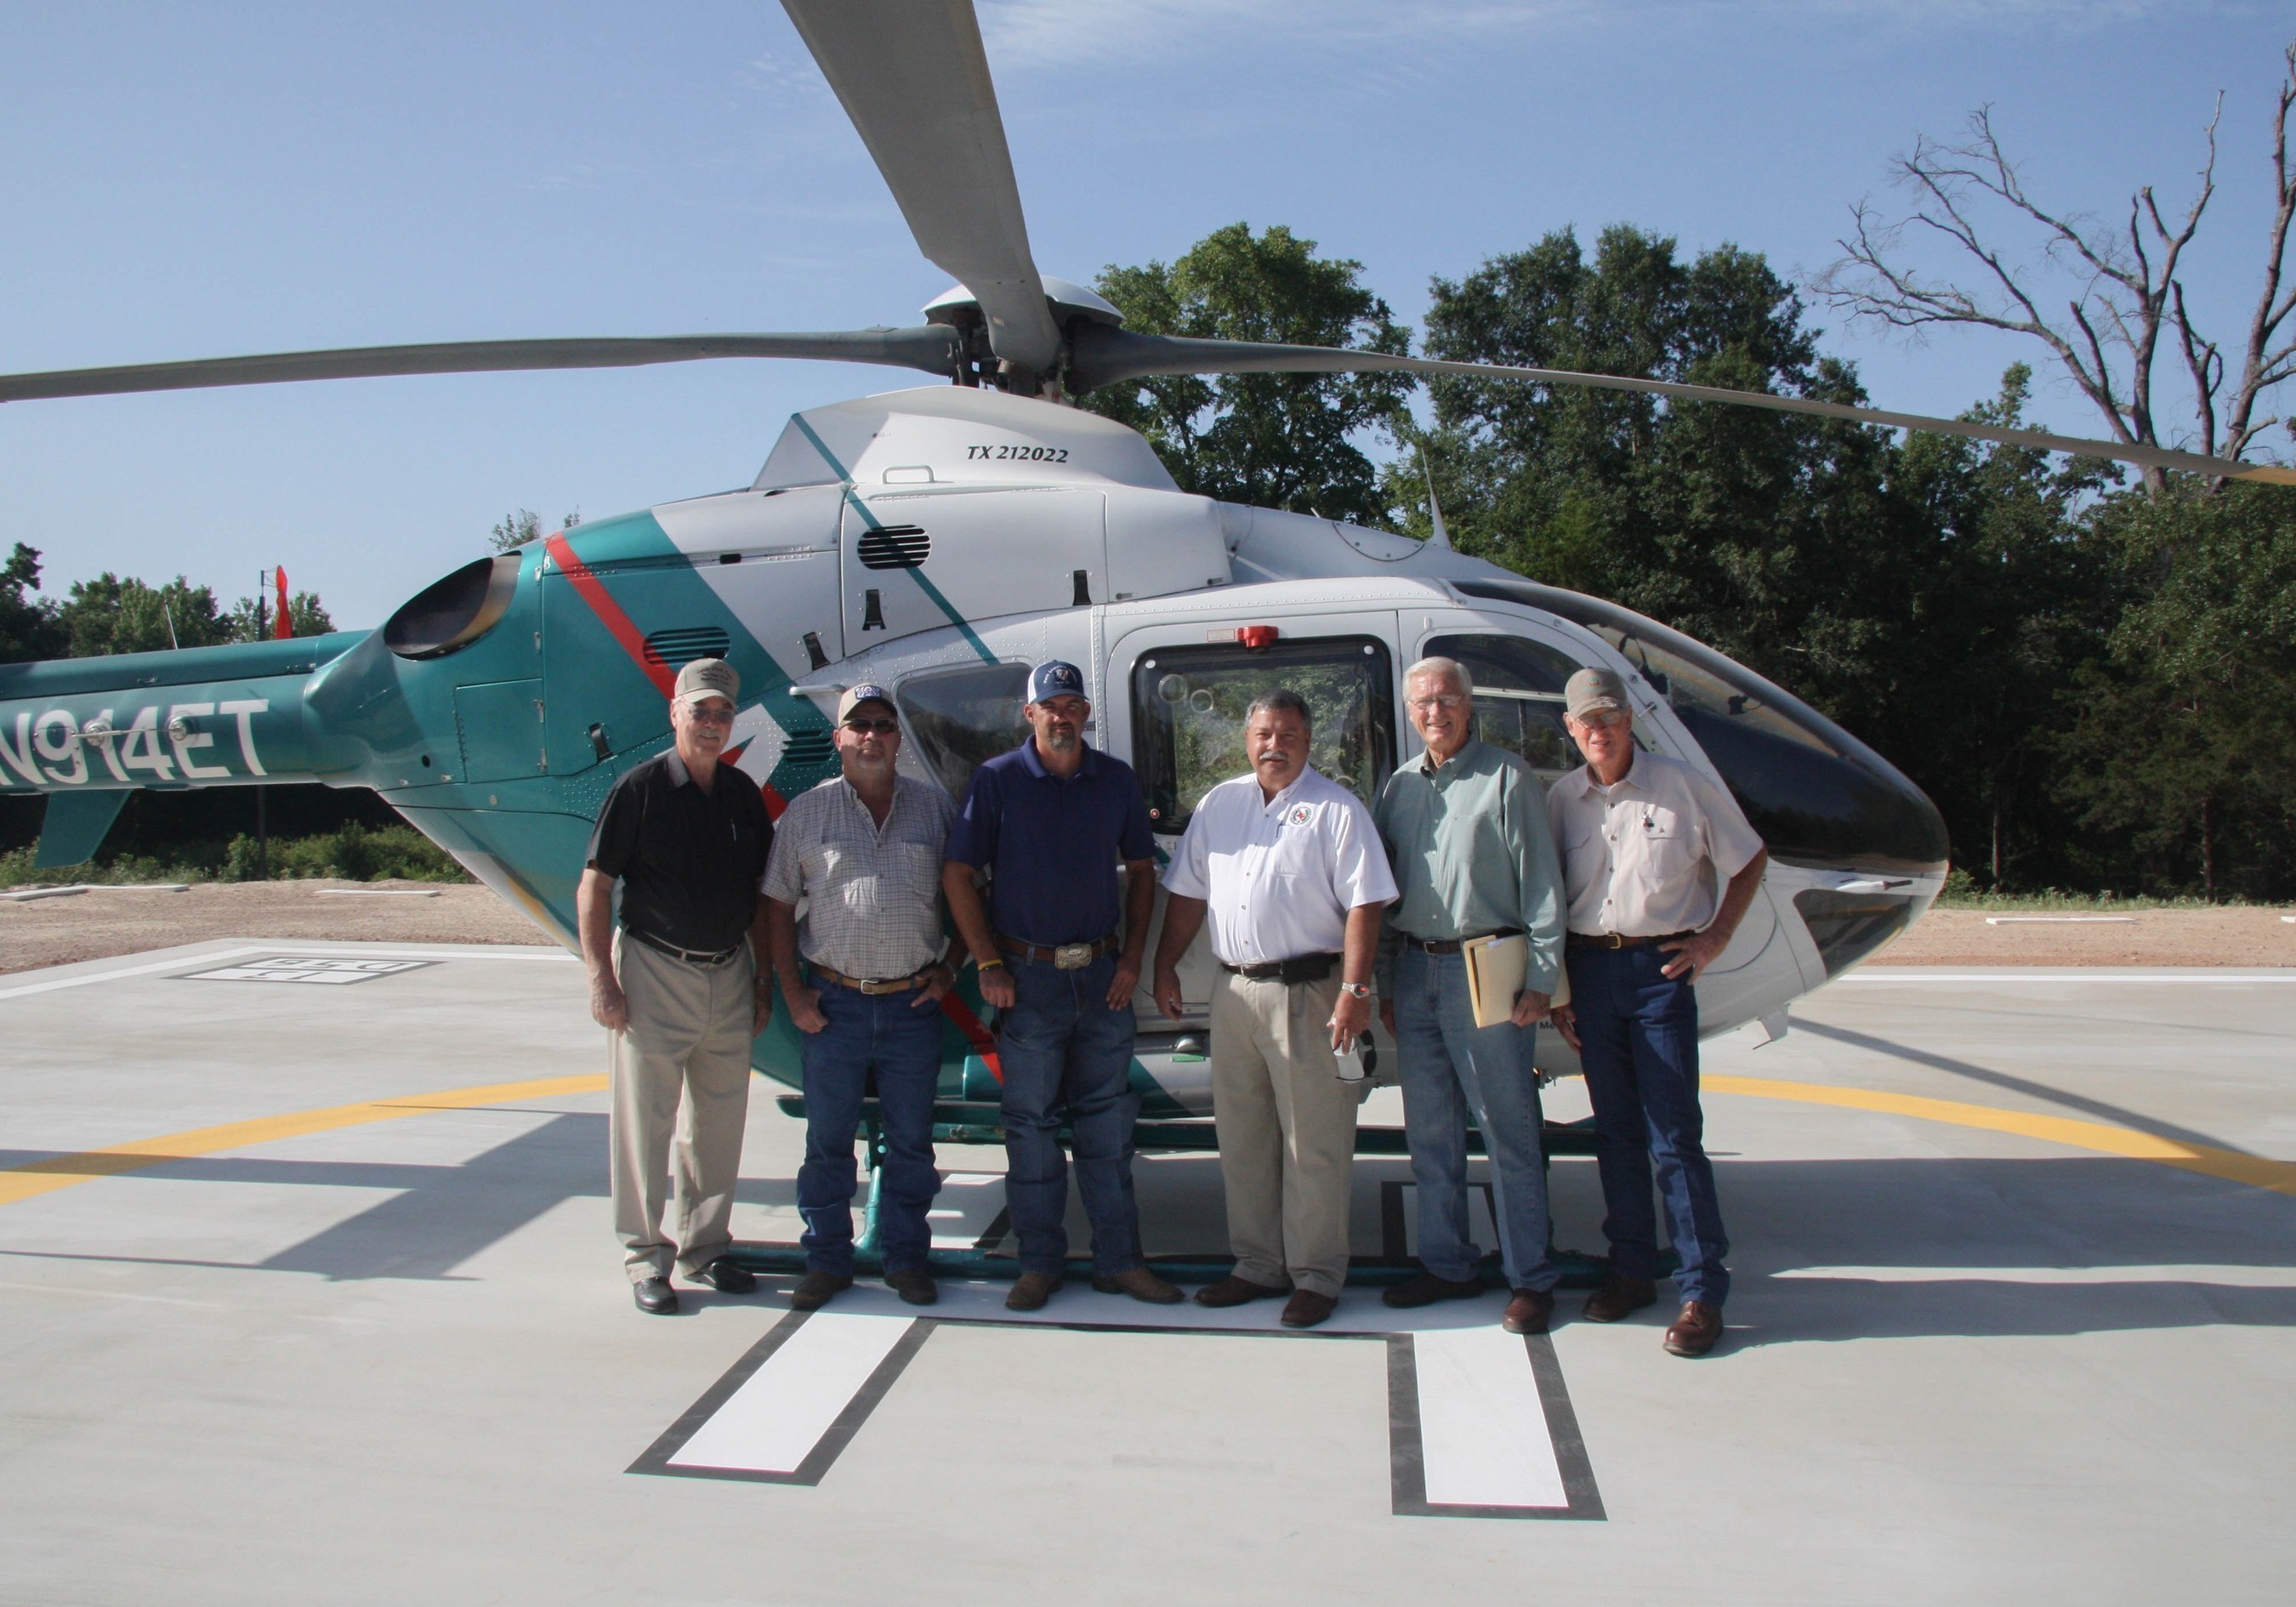 Photo of community leaders at new Anderson County heliport: (Left to right) David Lang, Director of Trinity Valley Electric; Bob Sheppler, Anderson County rancher and contractor; Anderson County Commissioner Joey Hill; Anderson County Judge Robert Johnston; Anderson County Airport Zoning Commission Chairman Elton Bomer; and Airport Zoning Commissioner Bob Hill. (PRNewsFoto/Bradley Oaks Ranch)